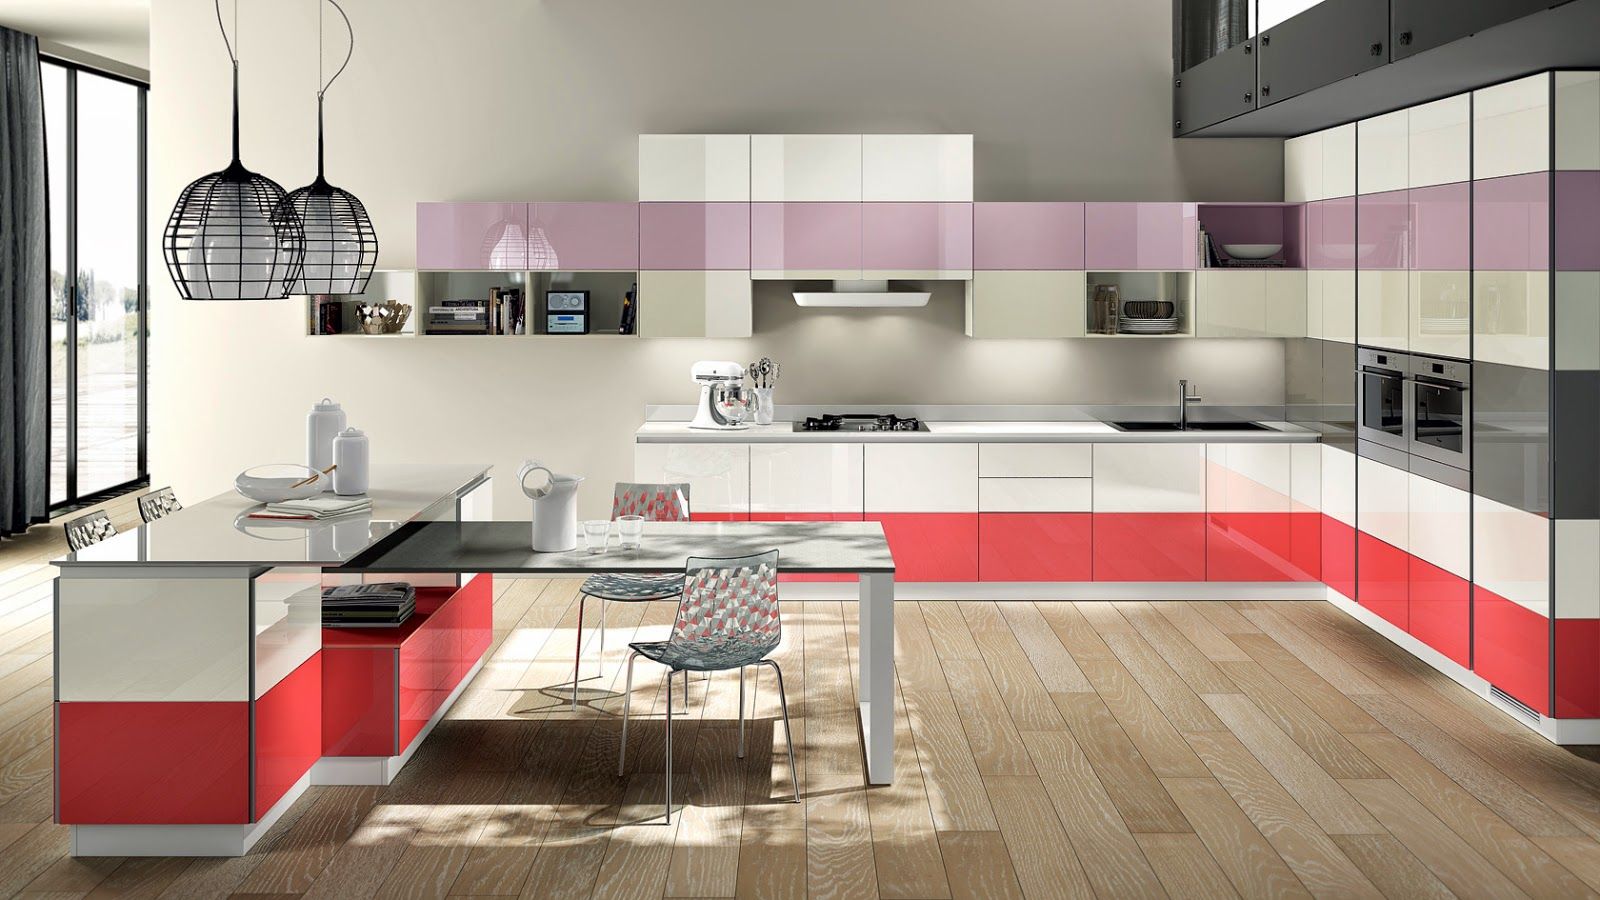 modular kitchen in Indore , colors kitchen gallery colors kitchen gallery مطبخ MDF